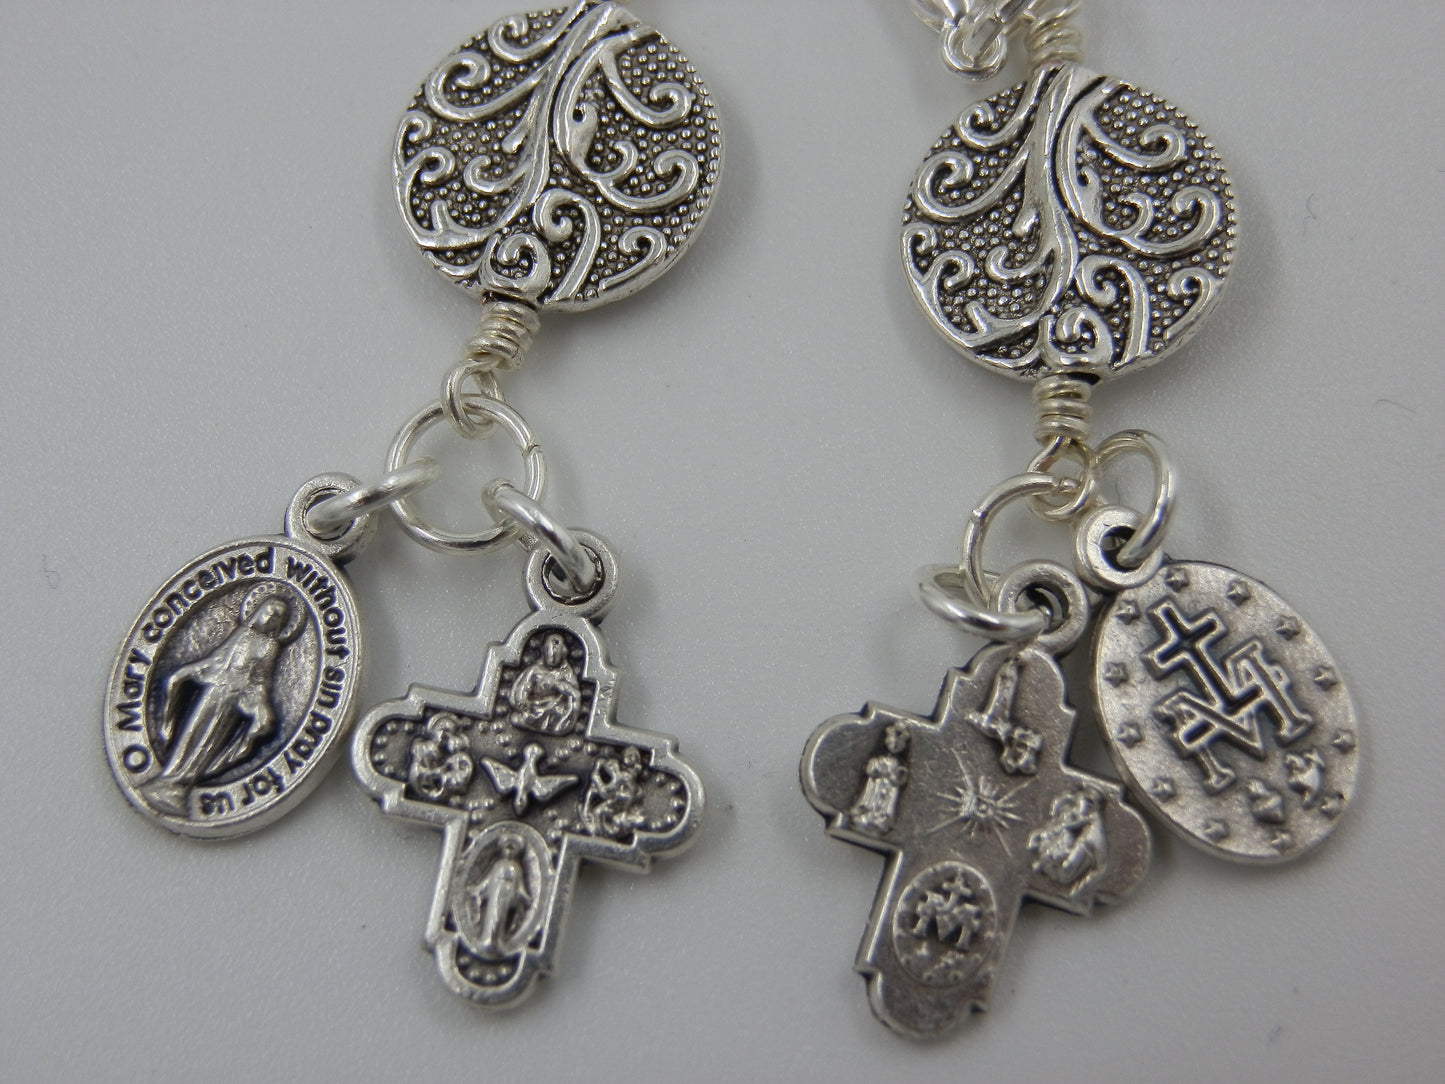 Miraculous medal keychain, Four way Cross medal, Holy Spirit Medal, Religious Purse clip, Religious gift, Travel Cross.